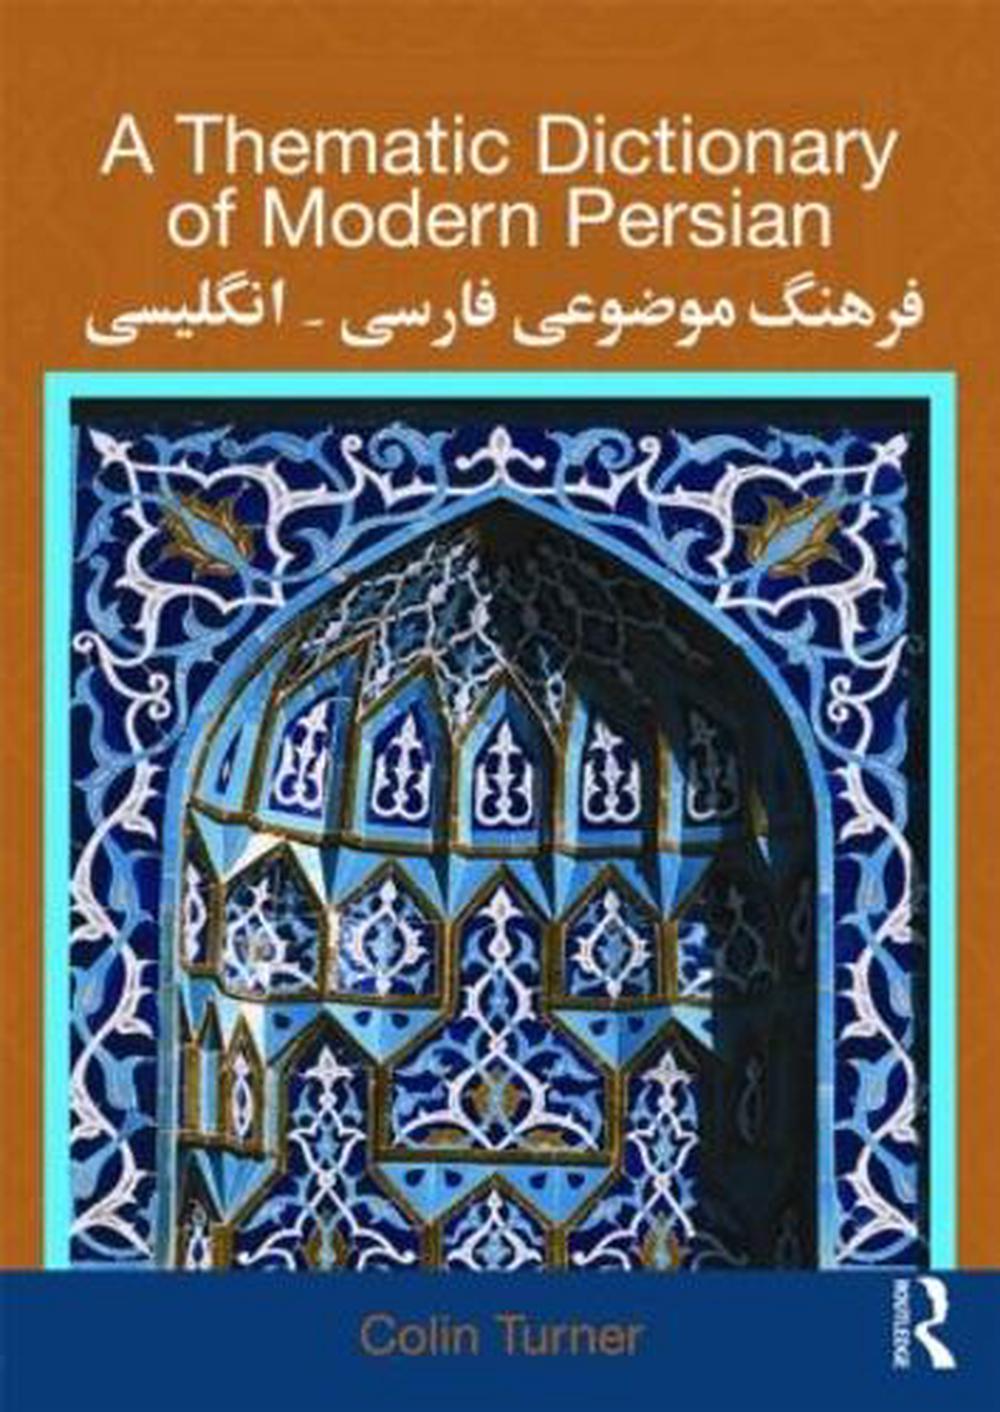 A Thematic Dictionary of Modern Persian by Colin Turner (English